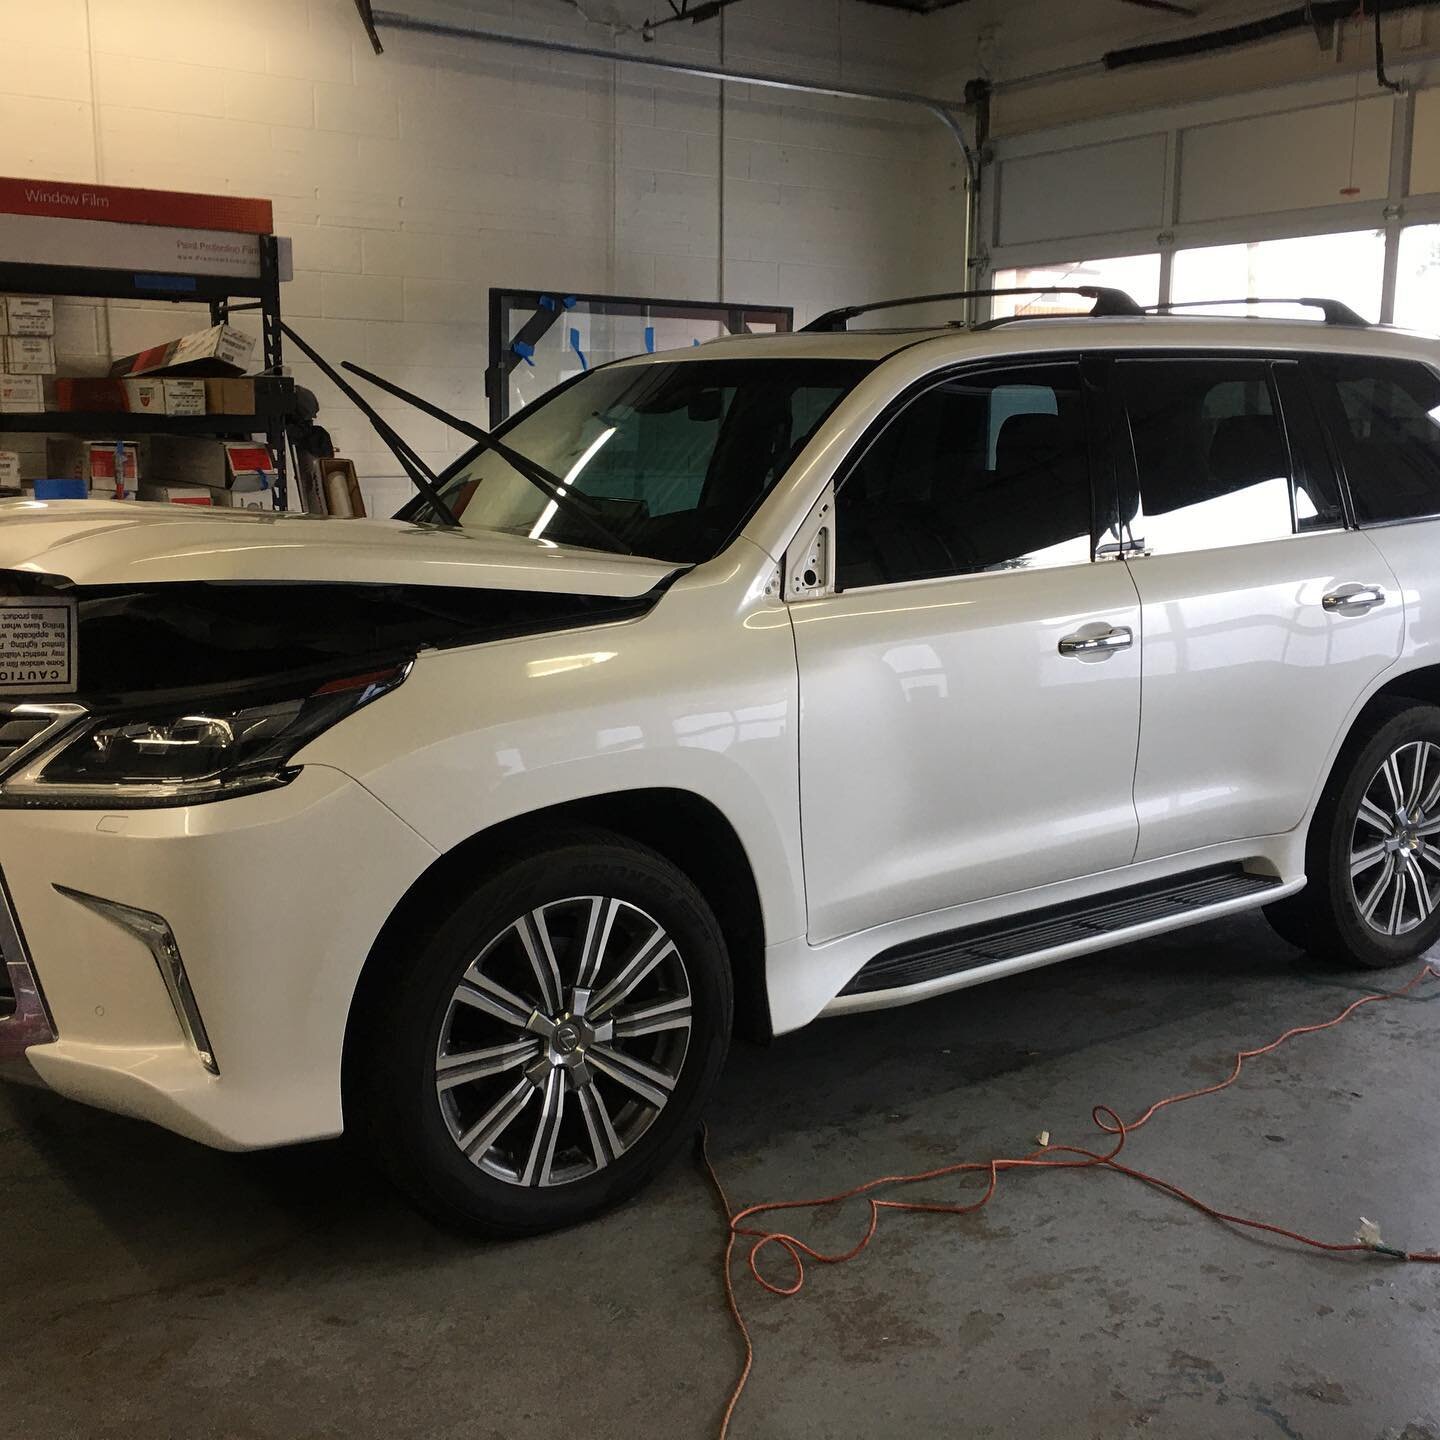 A few more full ceramic tint jobs from today and more progress on the lx570 full body ppf. Another 4runner for the exact same package as yesterday also. What do you think?